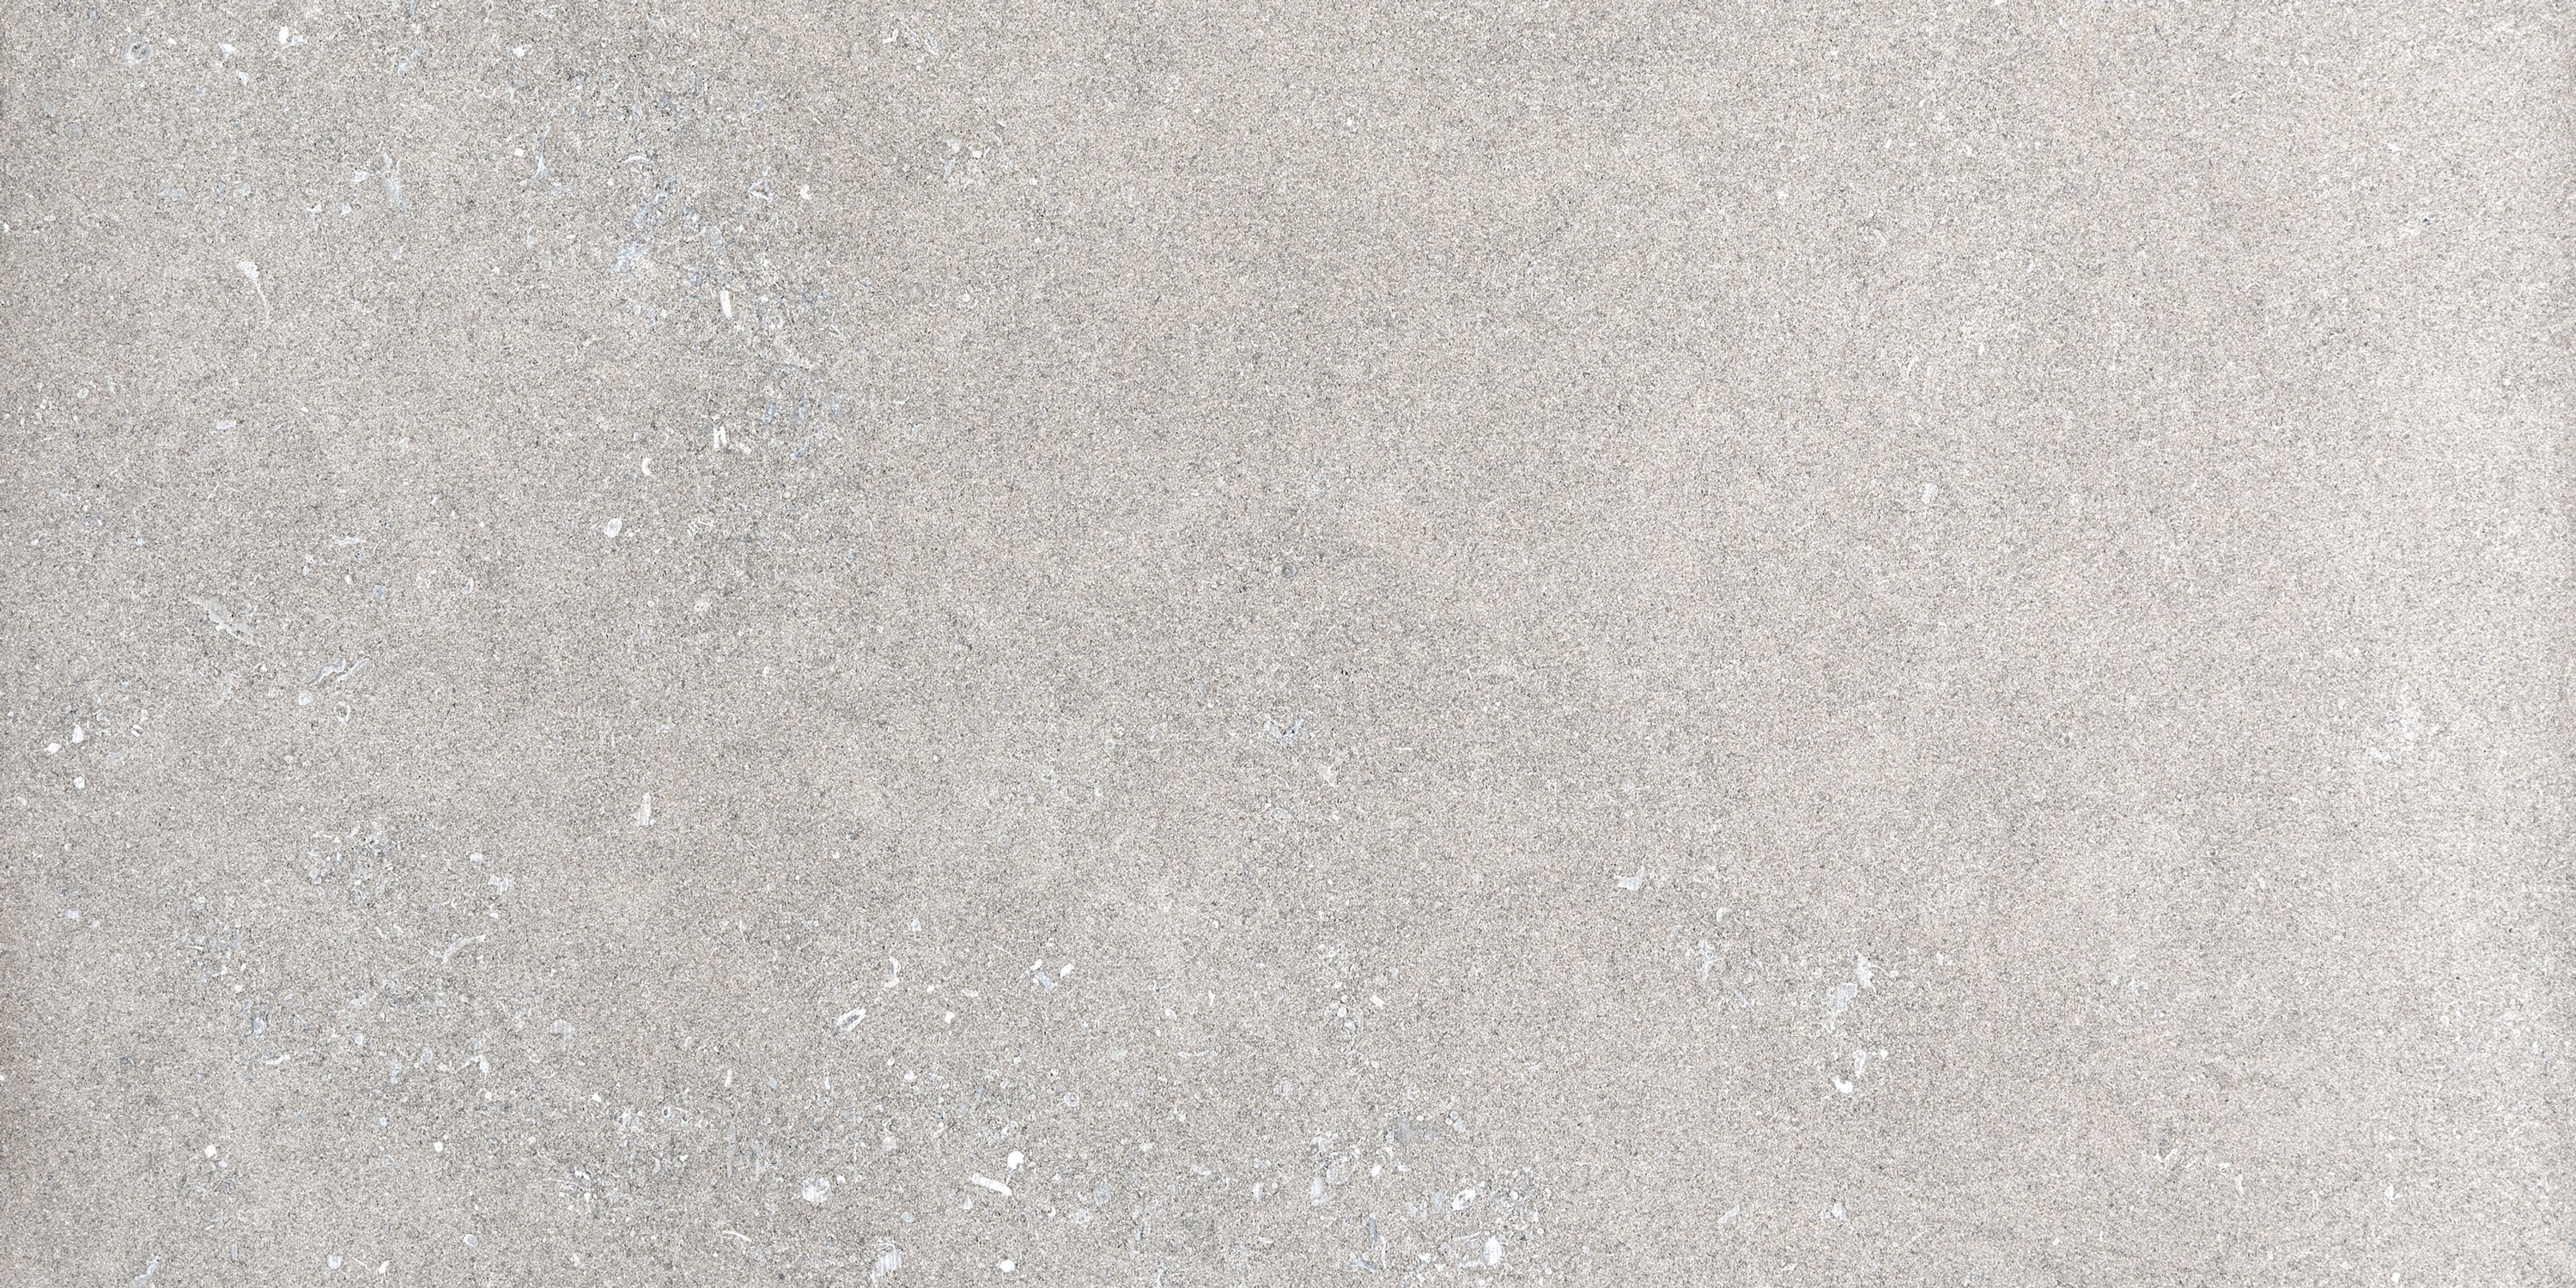 landmark frontier20 limestone indiana variegated paver tile 12x24x20mm matte rectified porcelain tile distributed by surface group international